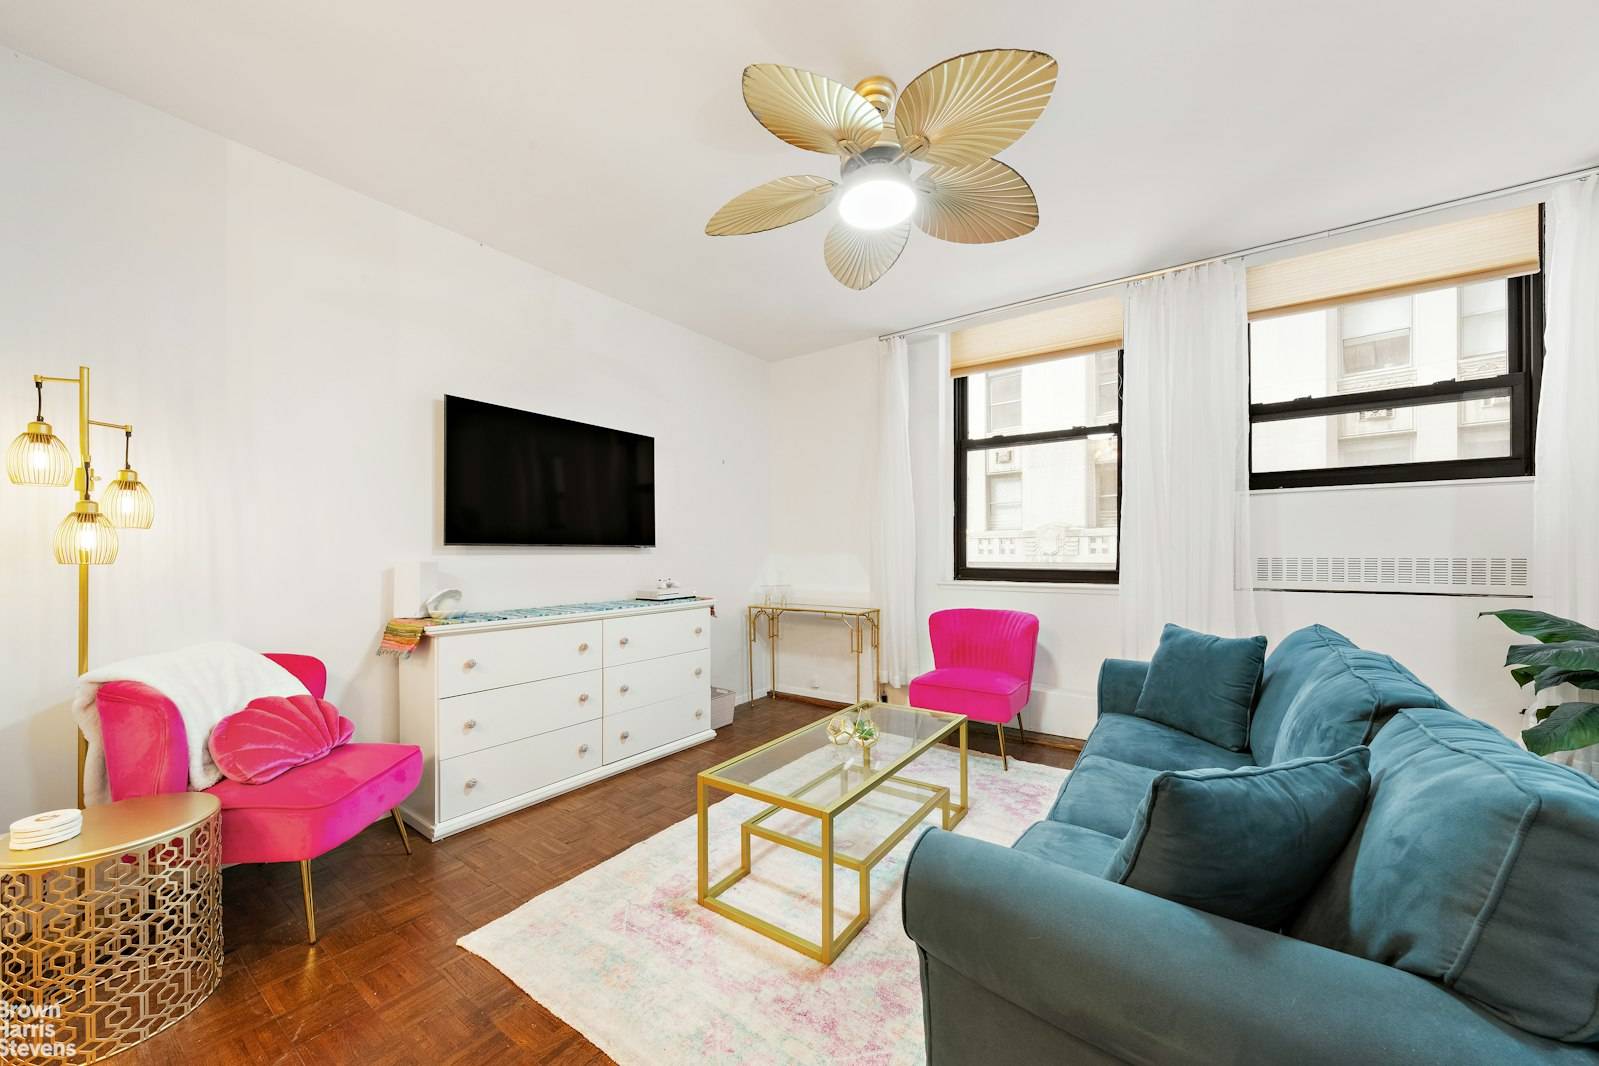 Welcome to this charming, pet friendly alcove studio apartment, easily convertible into to a one bedroom located on Hanover Square in the heart of New York City's Financial District.